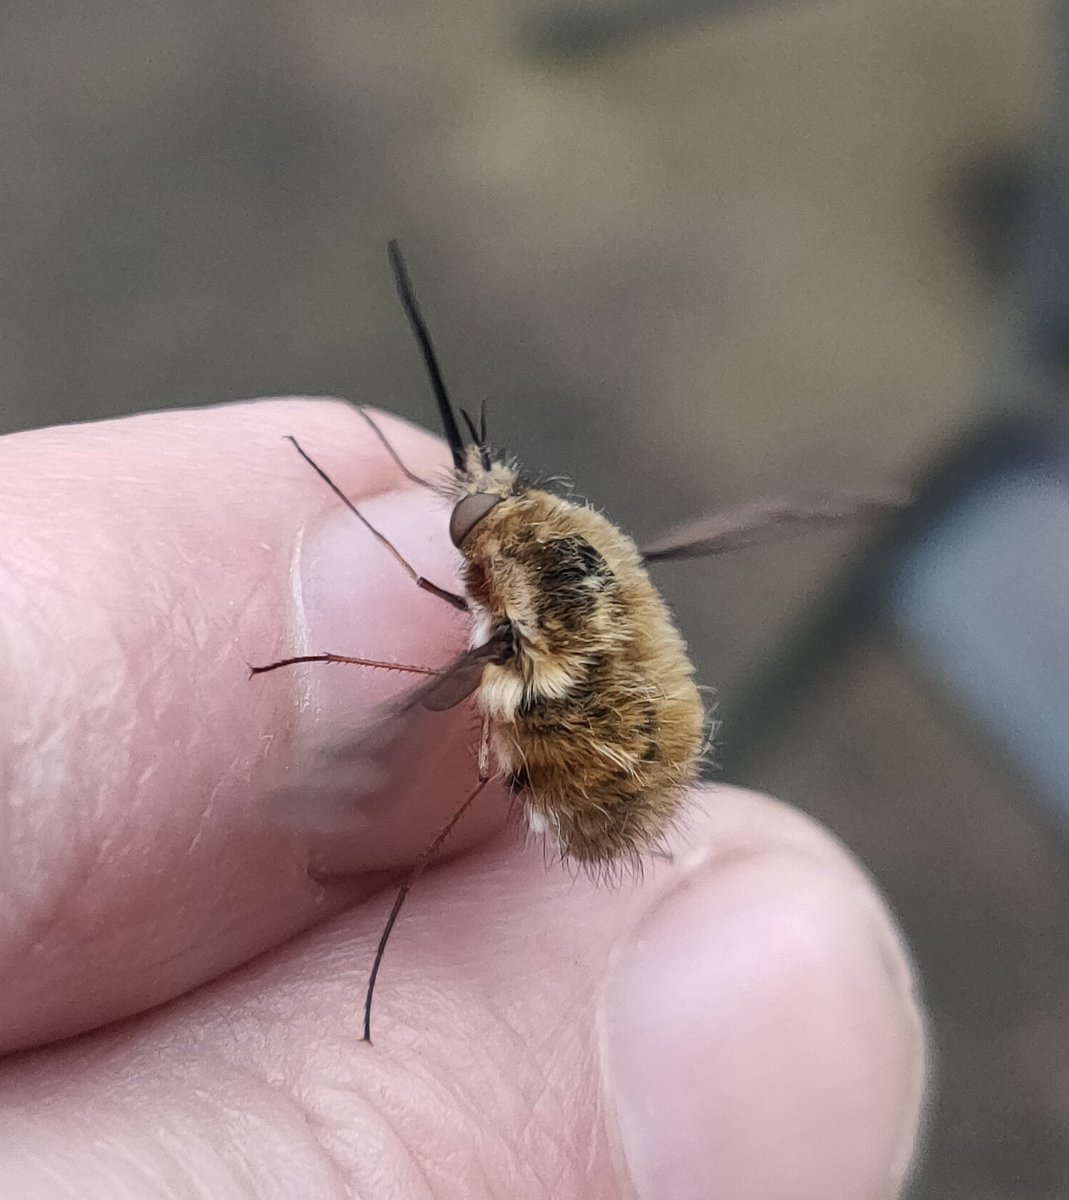 These seem to be getting more common, bee fly
#ukwildlife #beefly
#Bignose